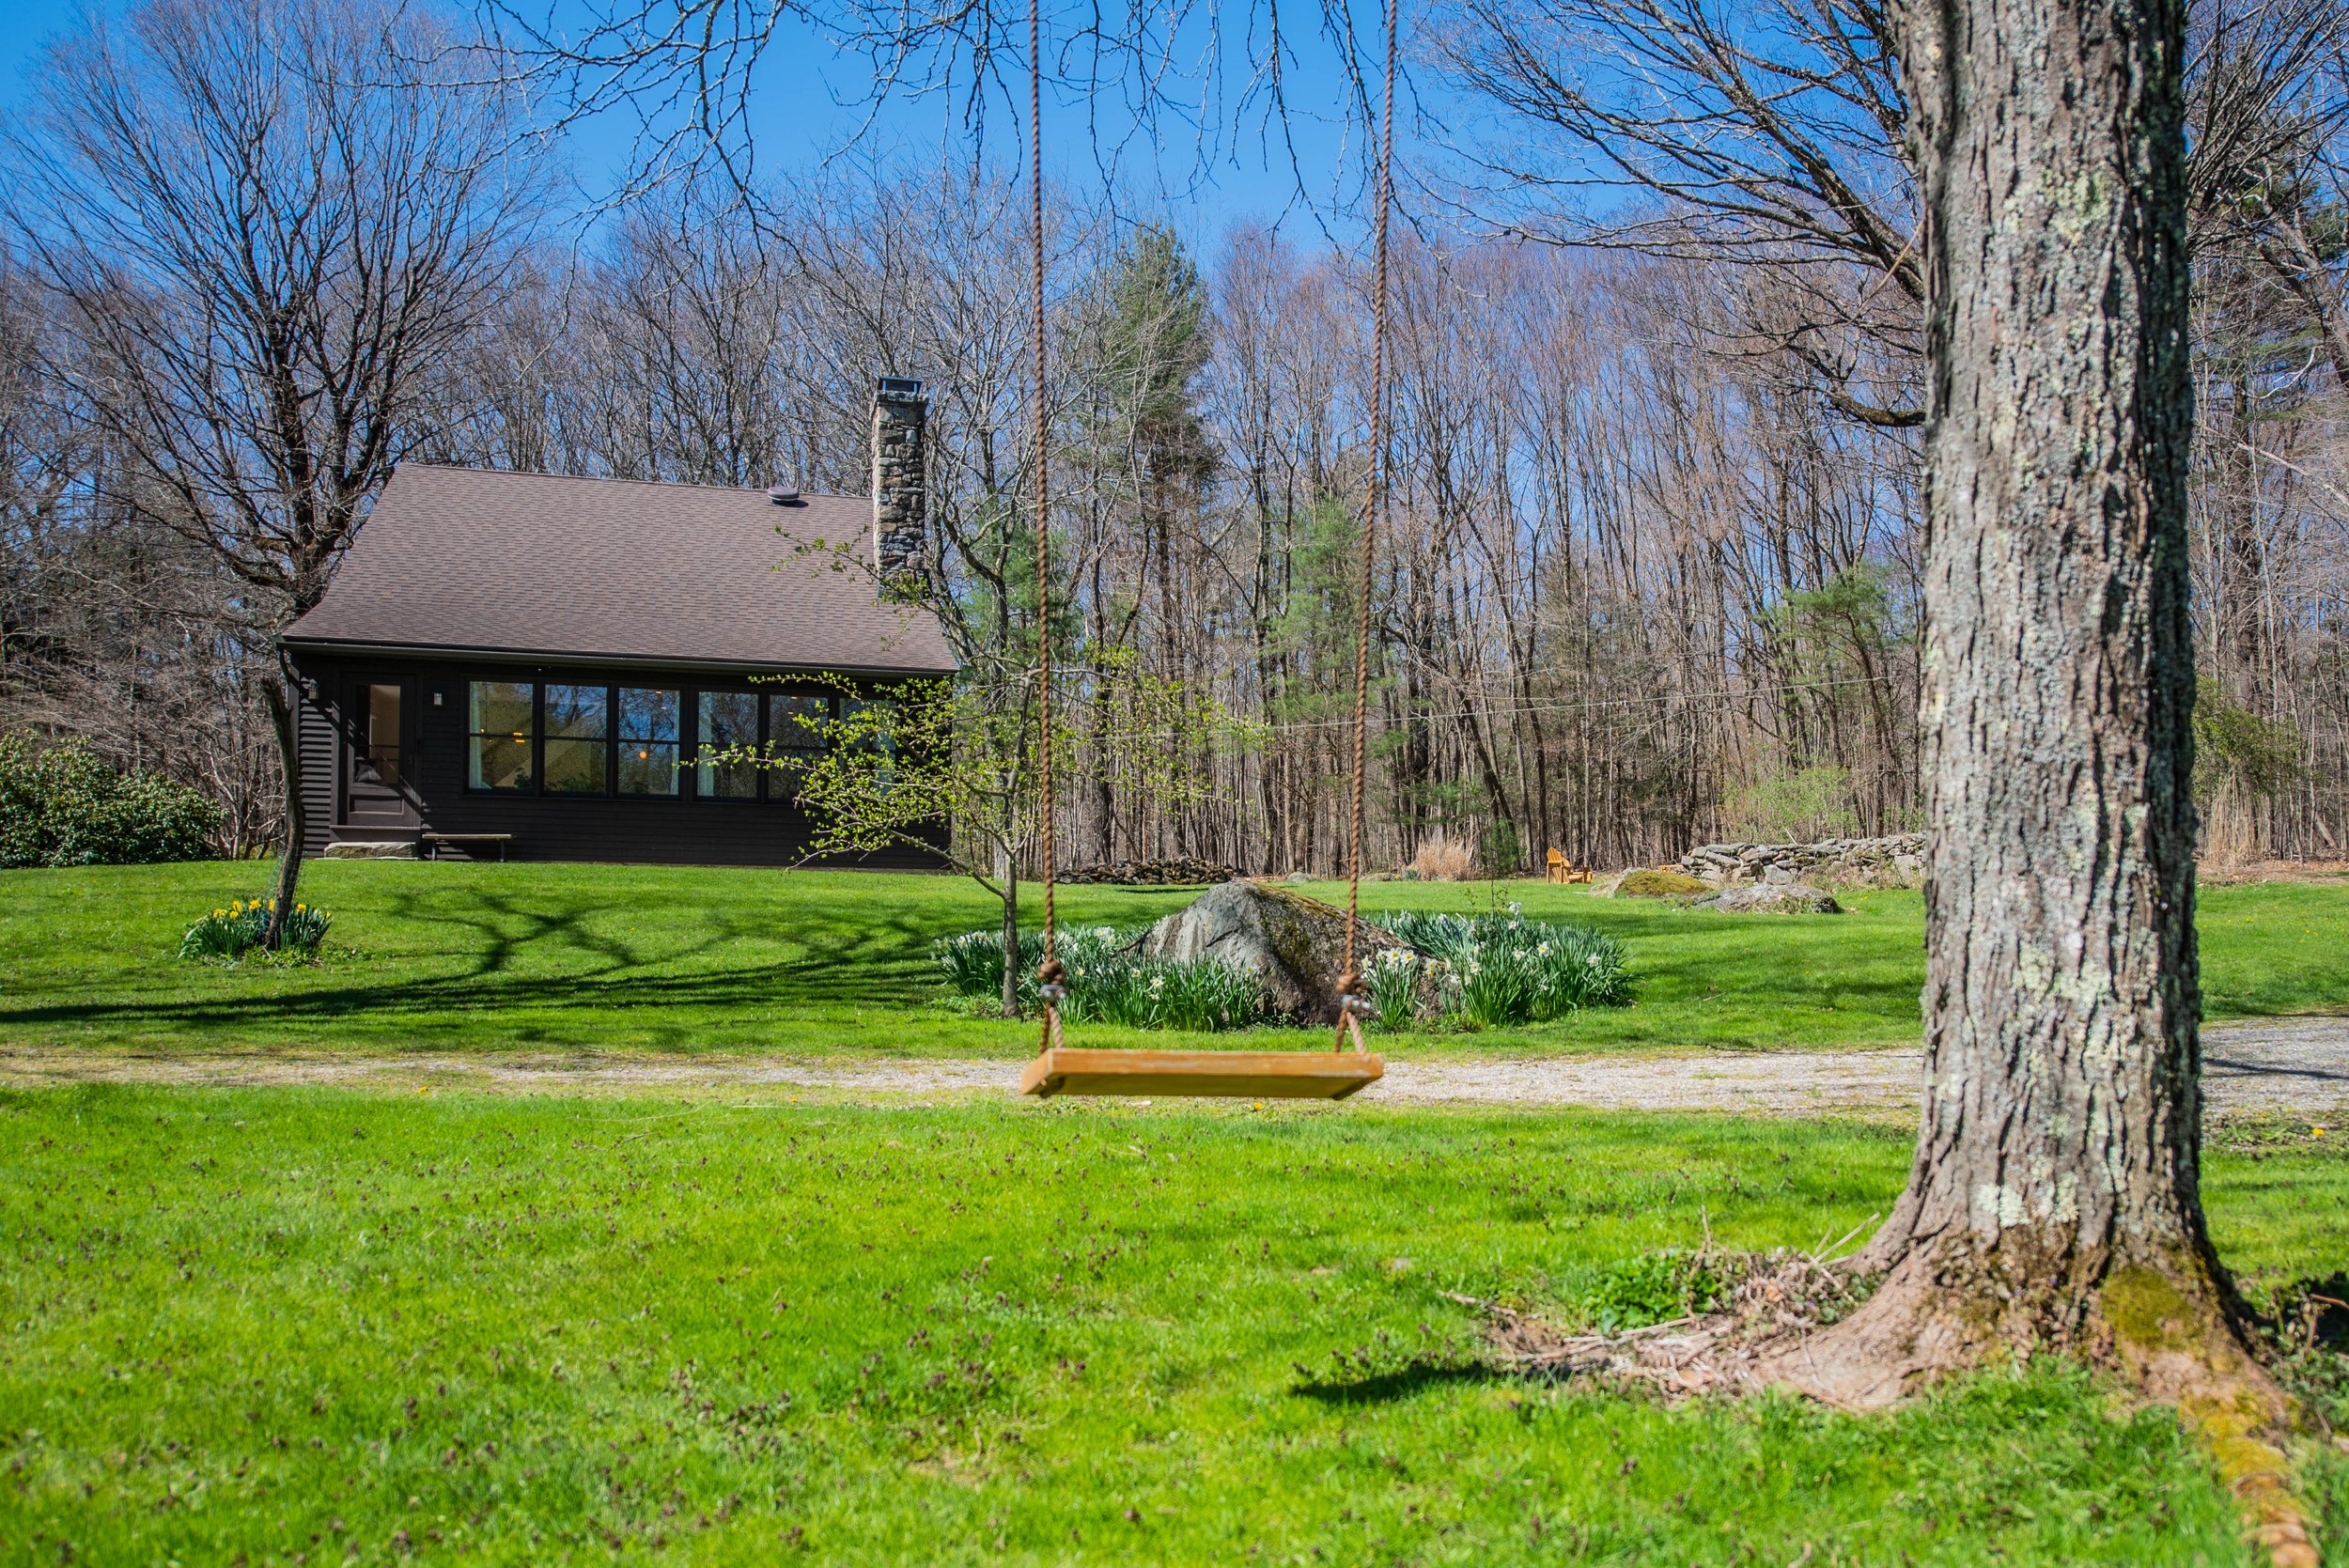 Home for sale in Litchfield Co., CT